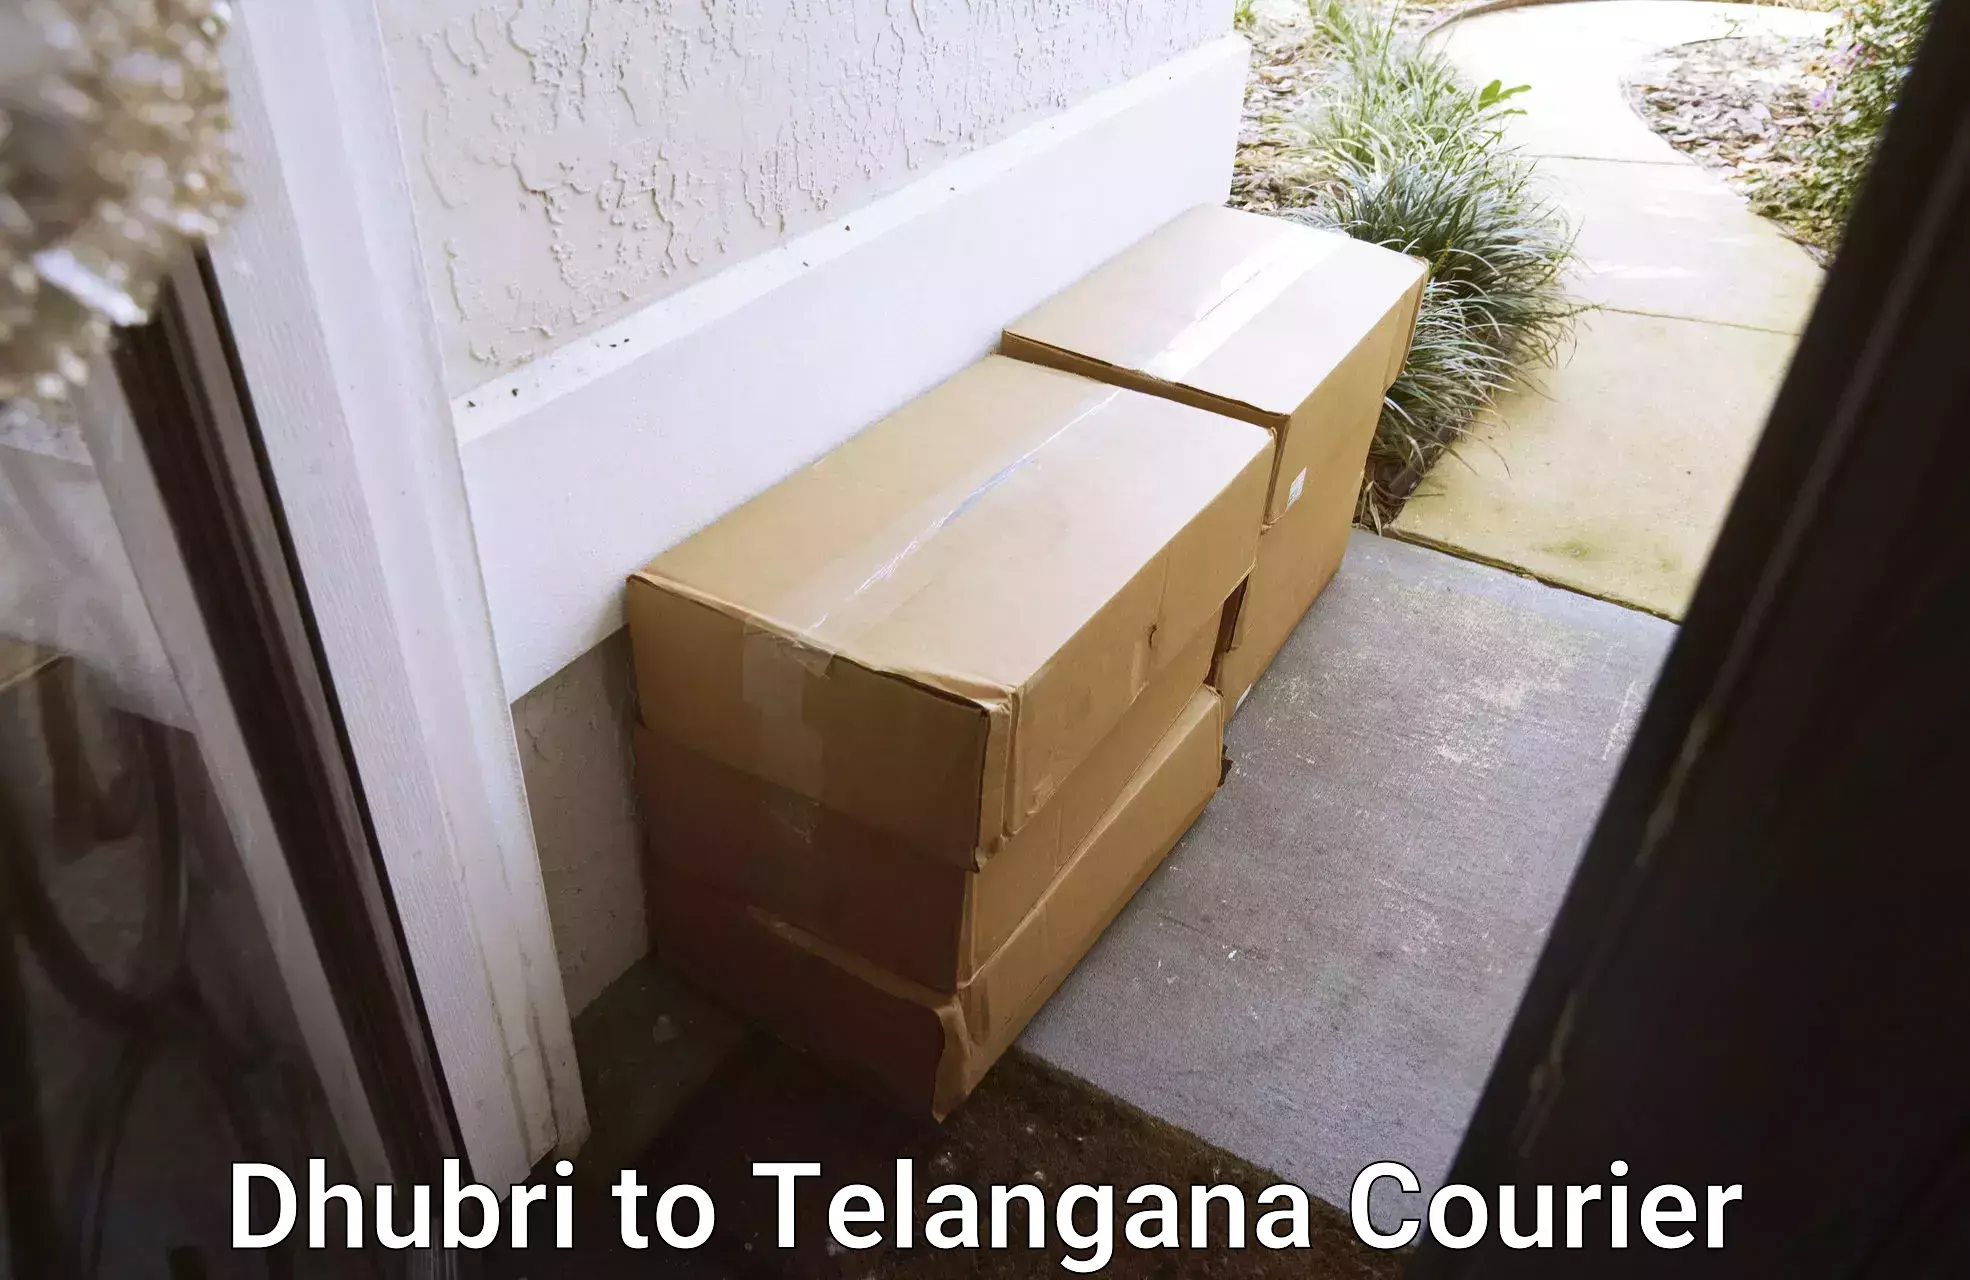 Full-service courier options Dhubri to Khairatabad